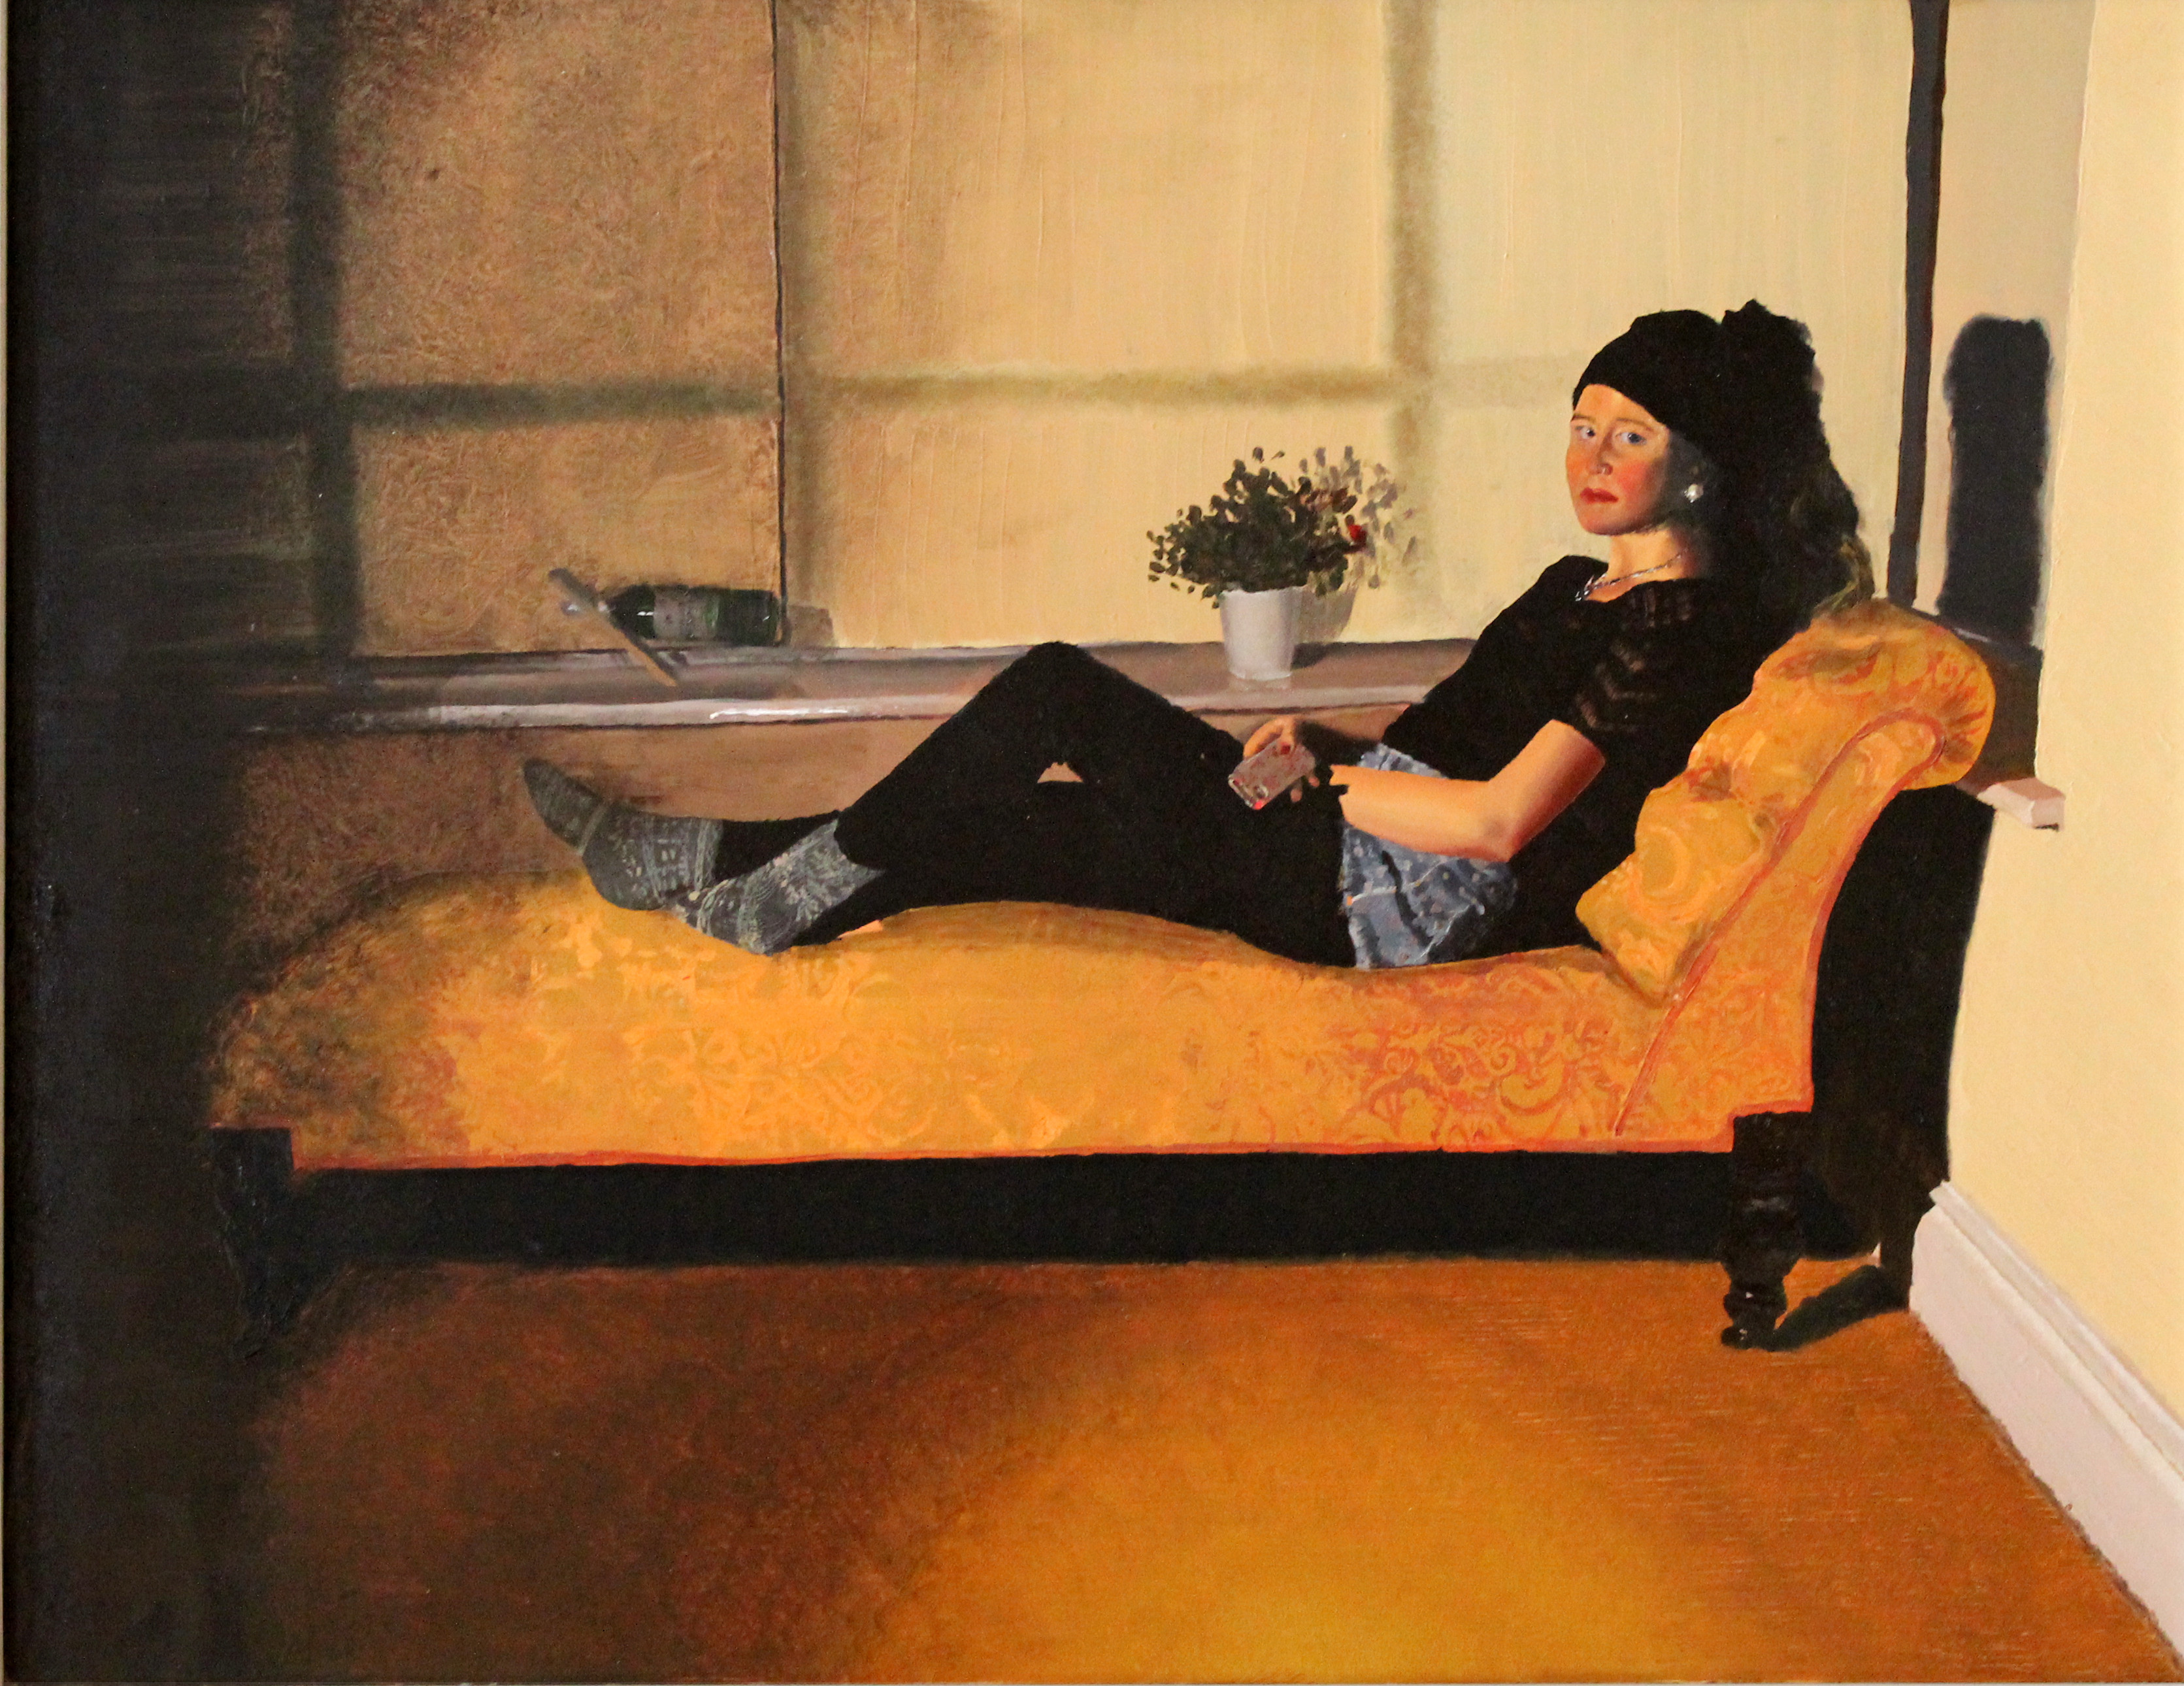 Girl On Chaise Lounge, 2014. Oil on Board. 